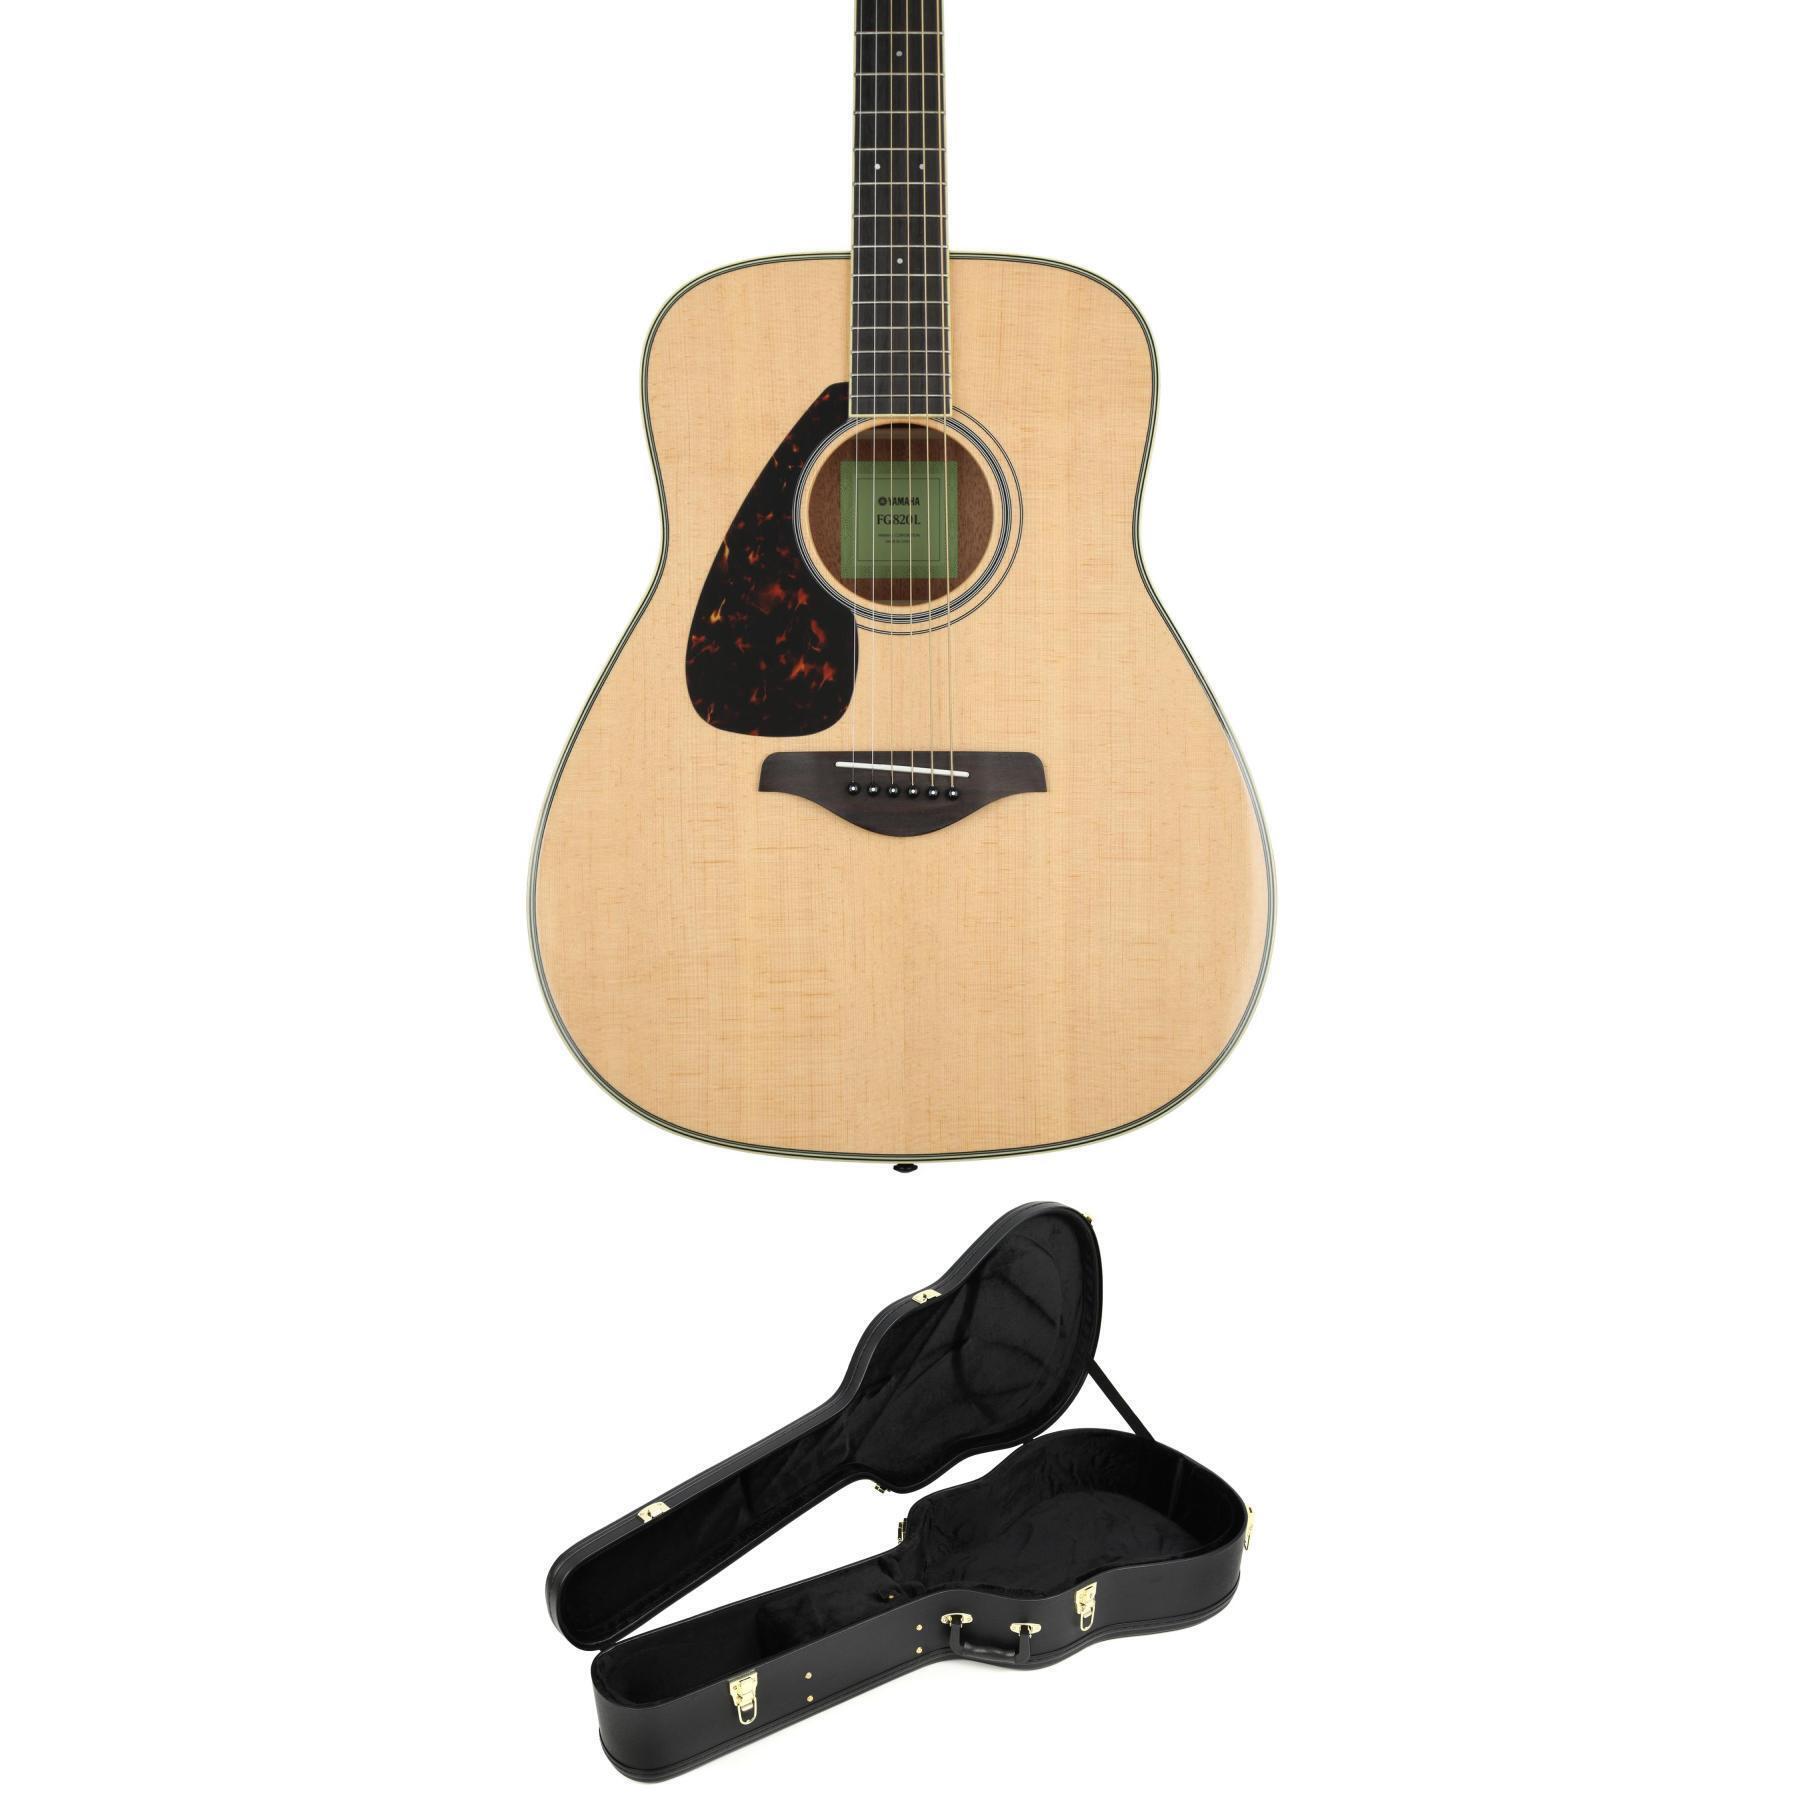 A Series - A1 - Acoustic Guitars - Guitars, Basses & Amps - Musical  Instruments - Products - Yamaha USA